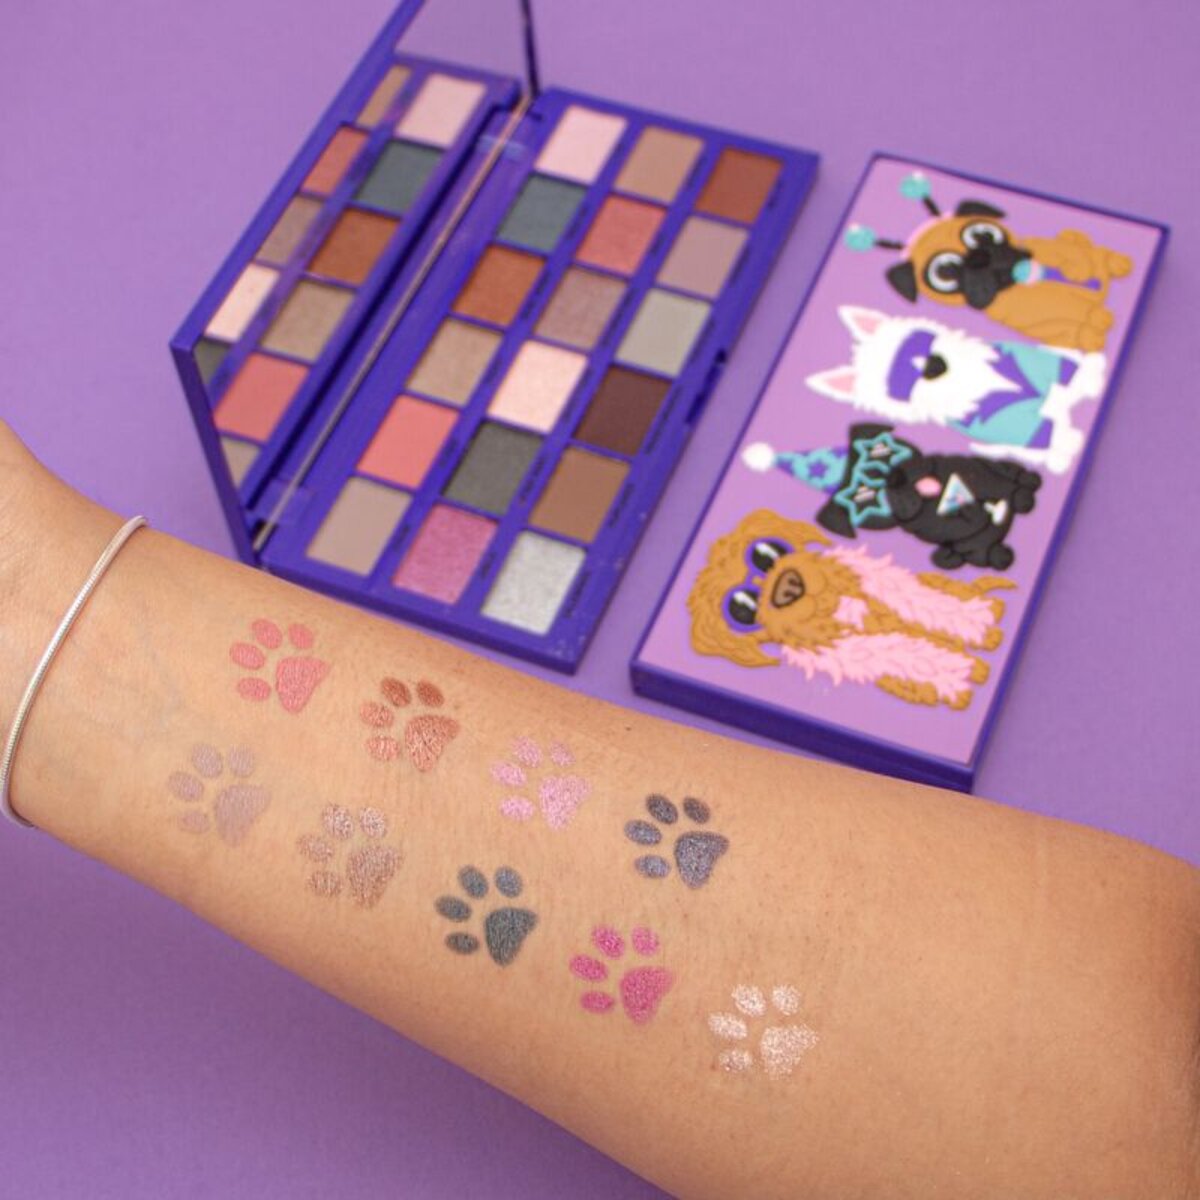 PARTY POOCHES PALETTE EYESHADOW PALETTE - I HEART REVOLUTION